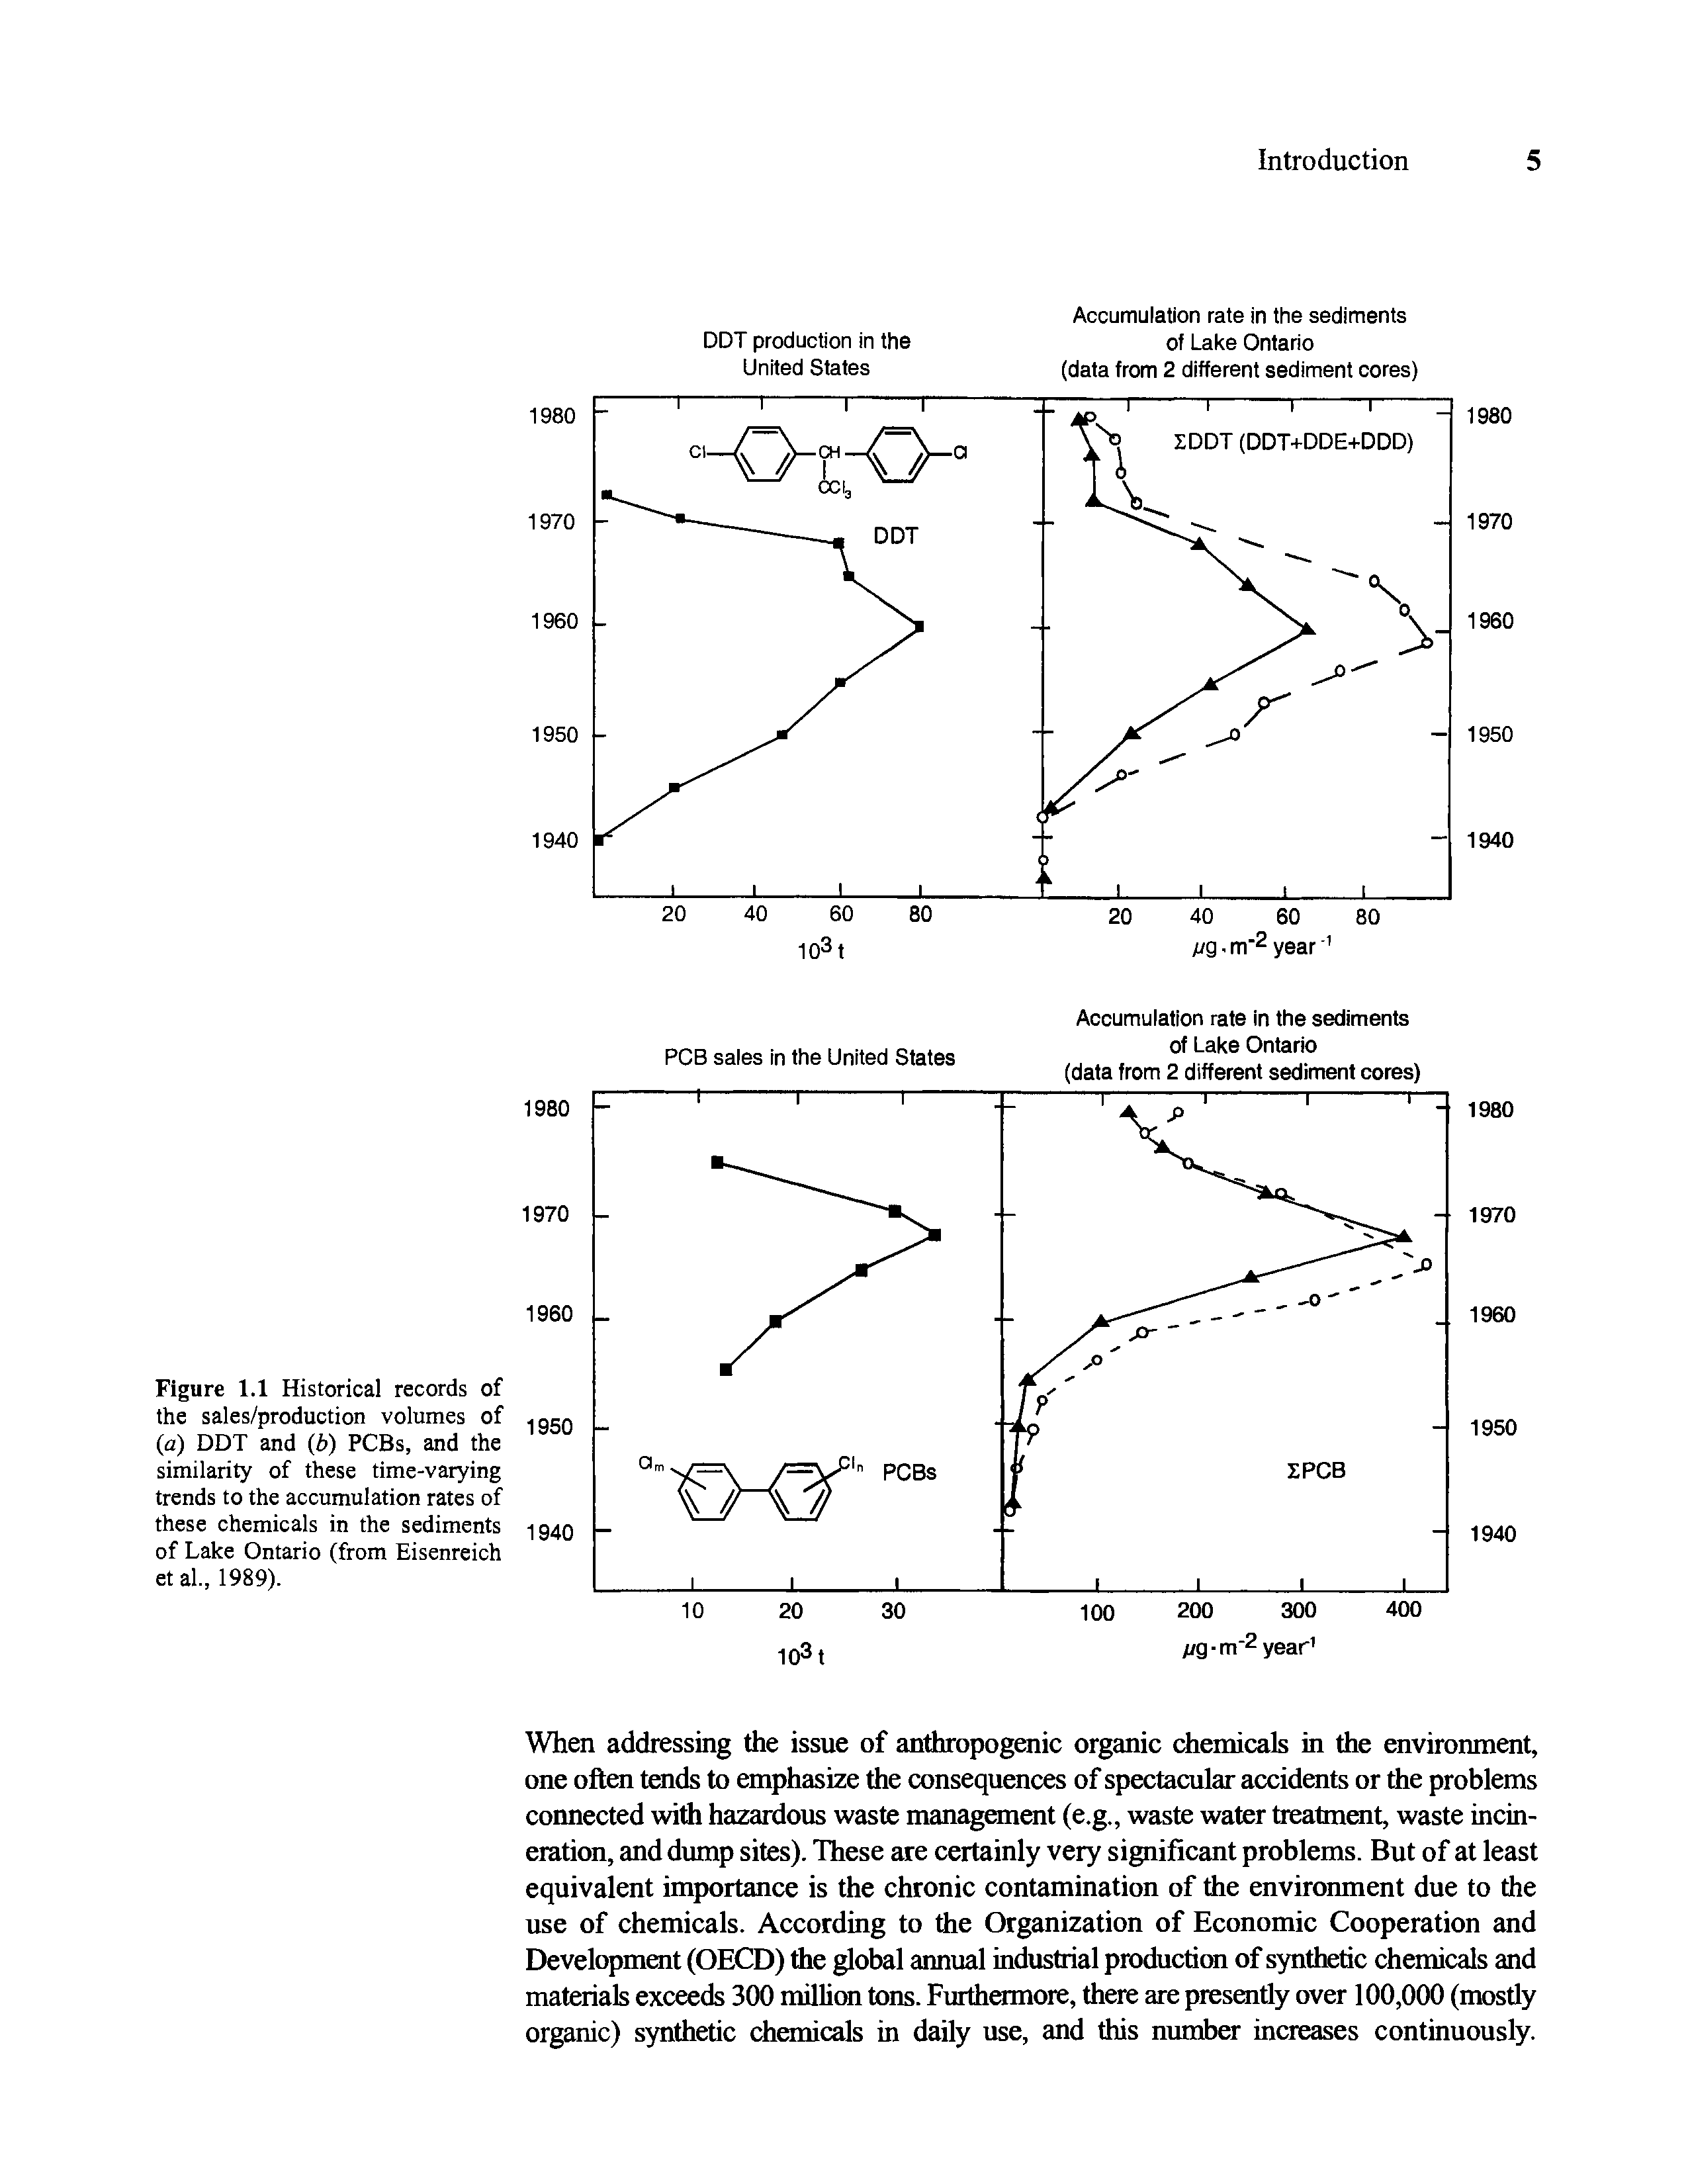 Figure 1.1 Historical records of the sales/production volumes of (a) DDT and (b) PCBs, and the similarity of these time-varying trends to the accumulation rates of these chemicals in the sediments of Lake Ontario (from Eisenreich et al., 1989).